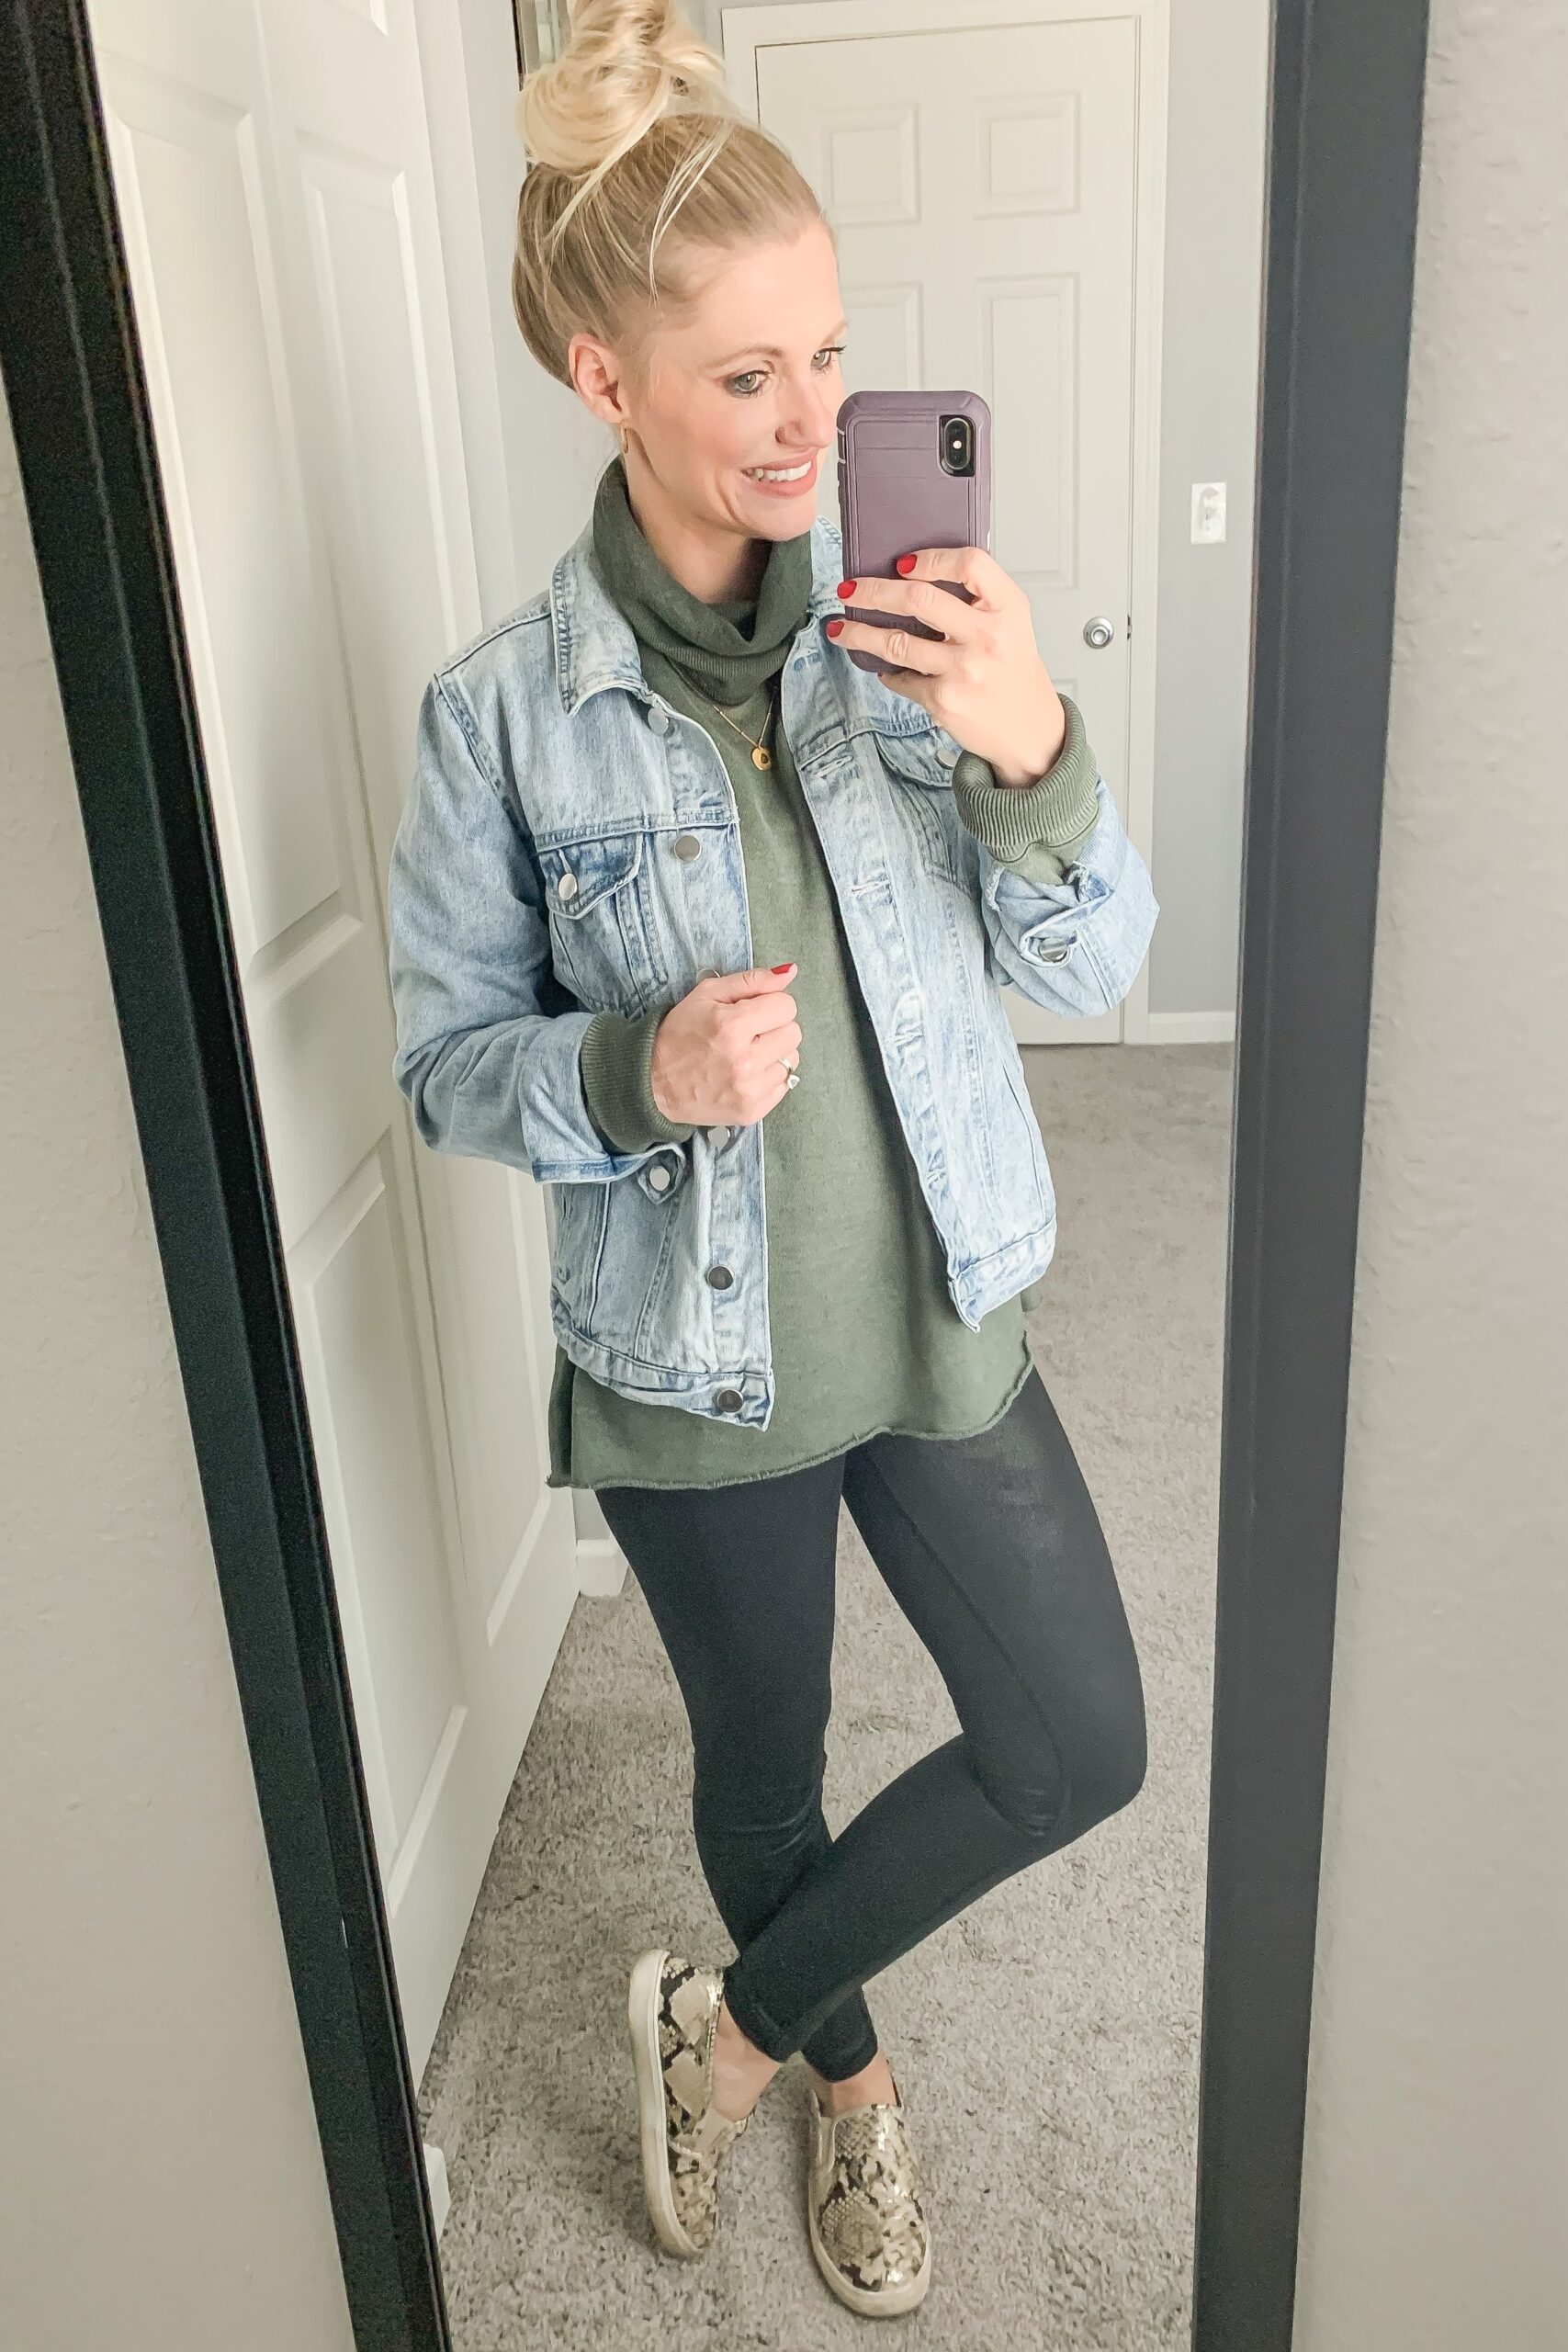 Easy Winter Layering Outfits - Thrifty Wife Happy Life